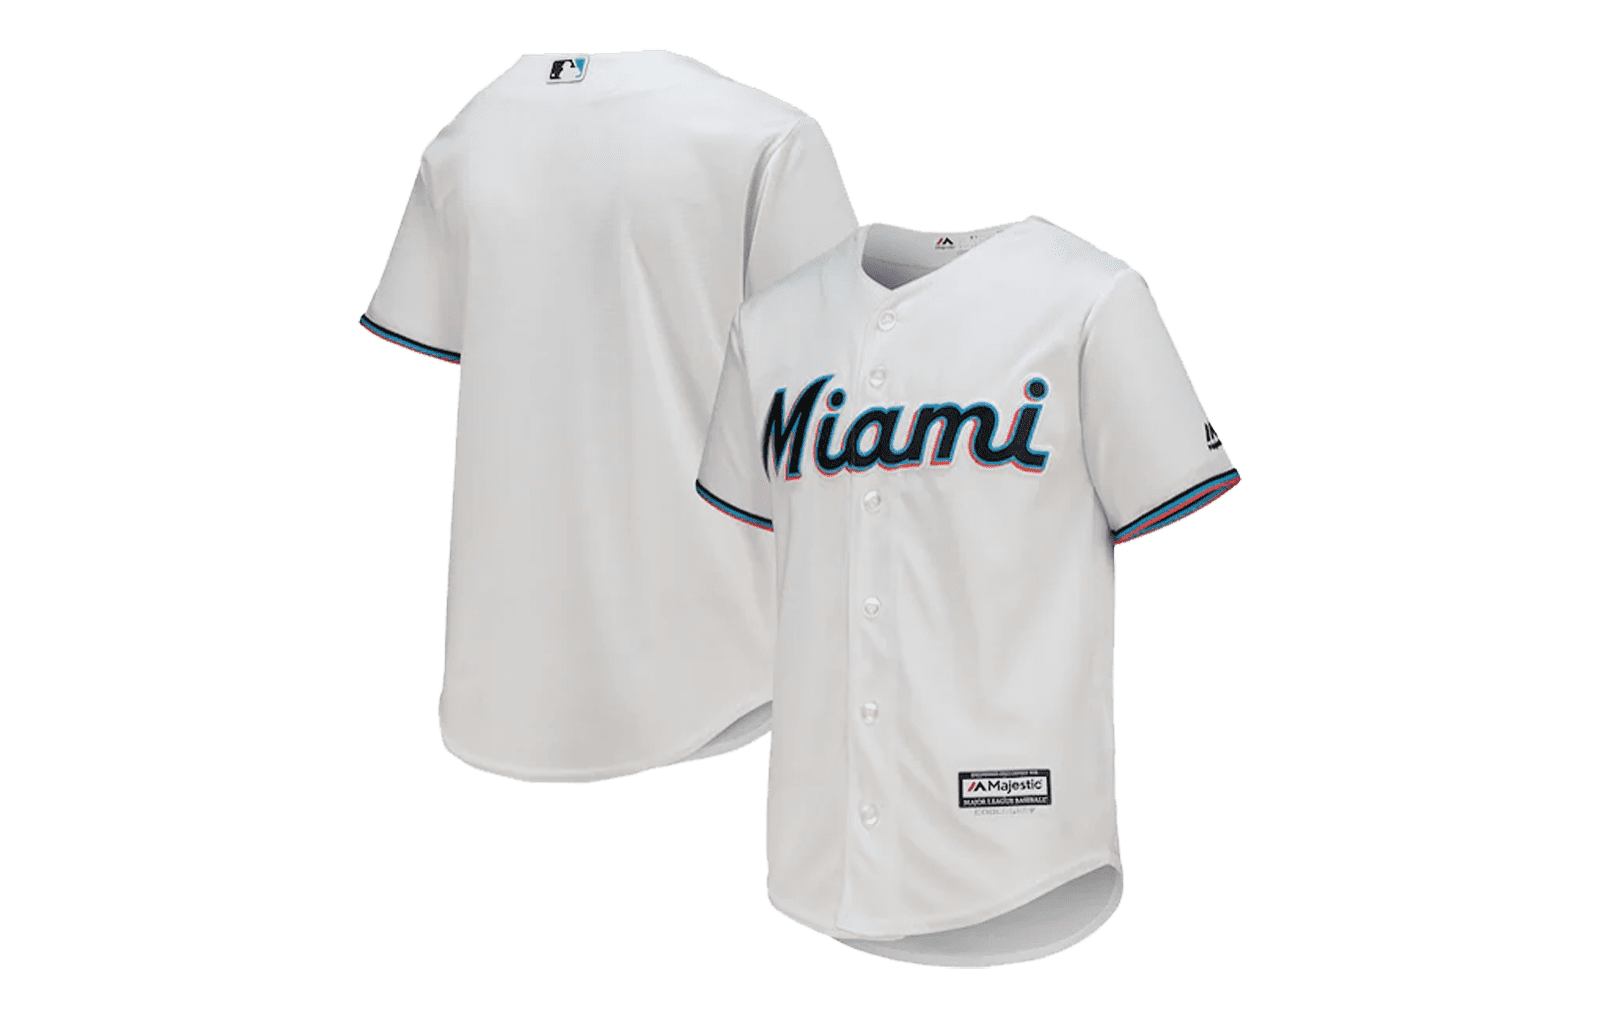 Reviewing the New Miami Marlins uniforms and logo